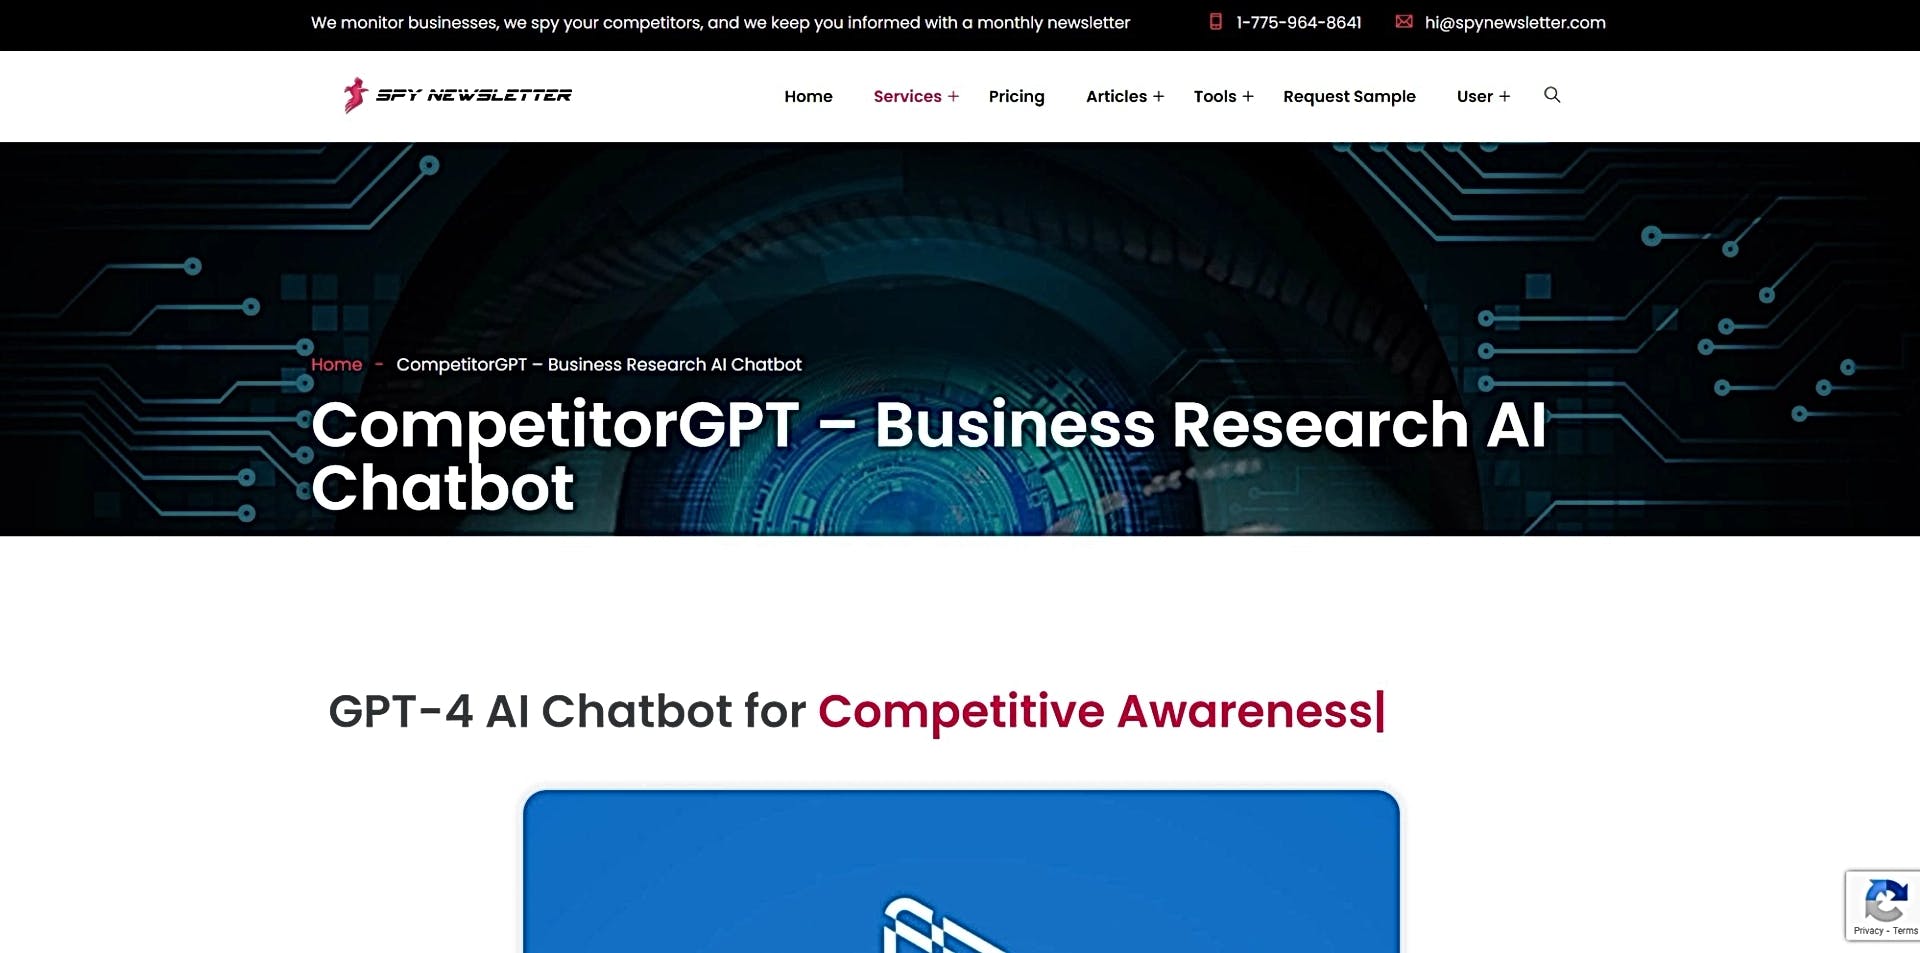 CompetitorGPT featured